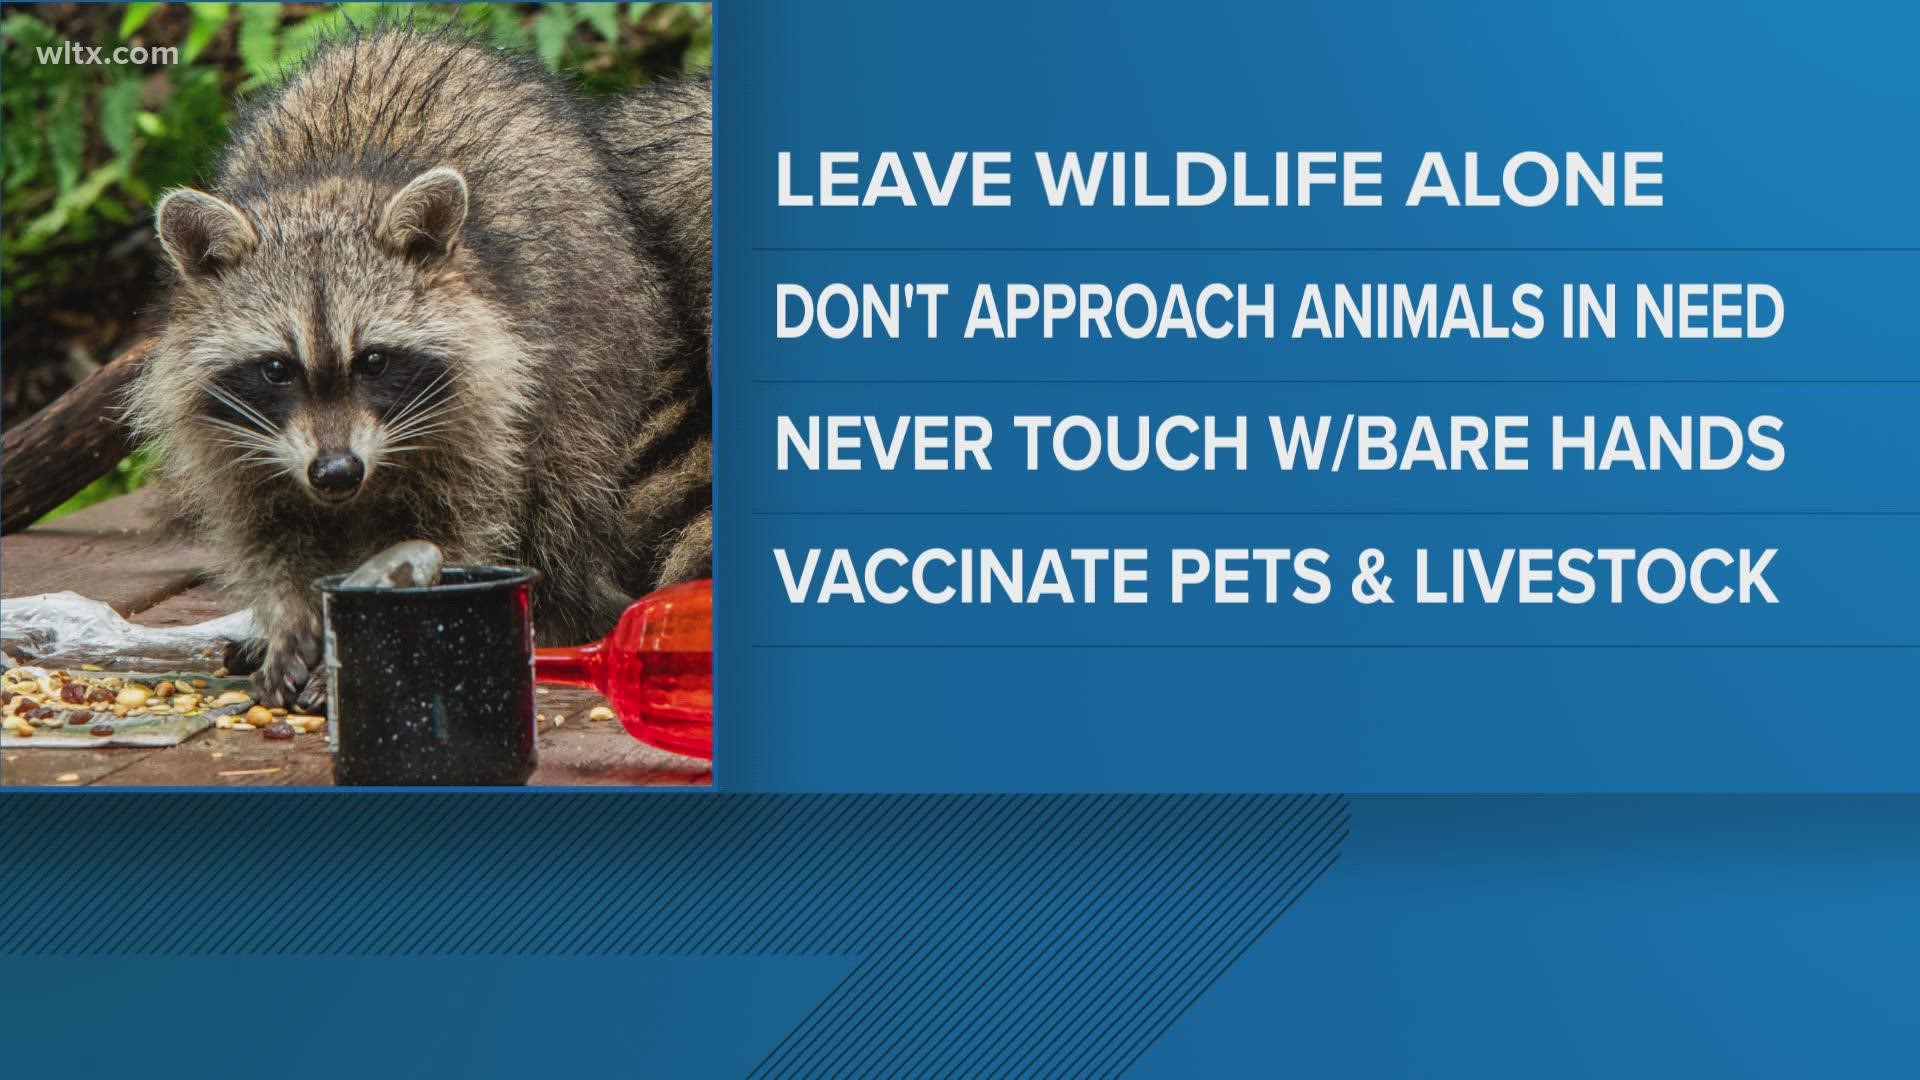 DHEC is teaming with the Department of Natural Resources to warn people of the risks of trying to make a pet out of a wild creature.